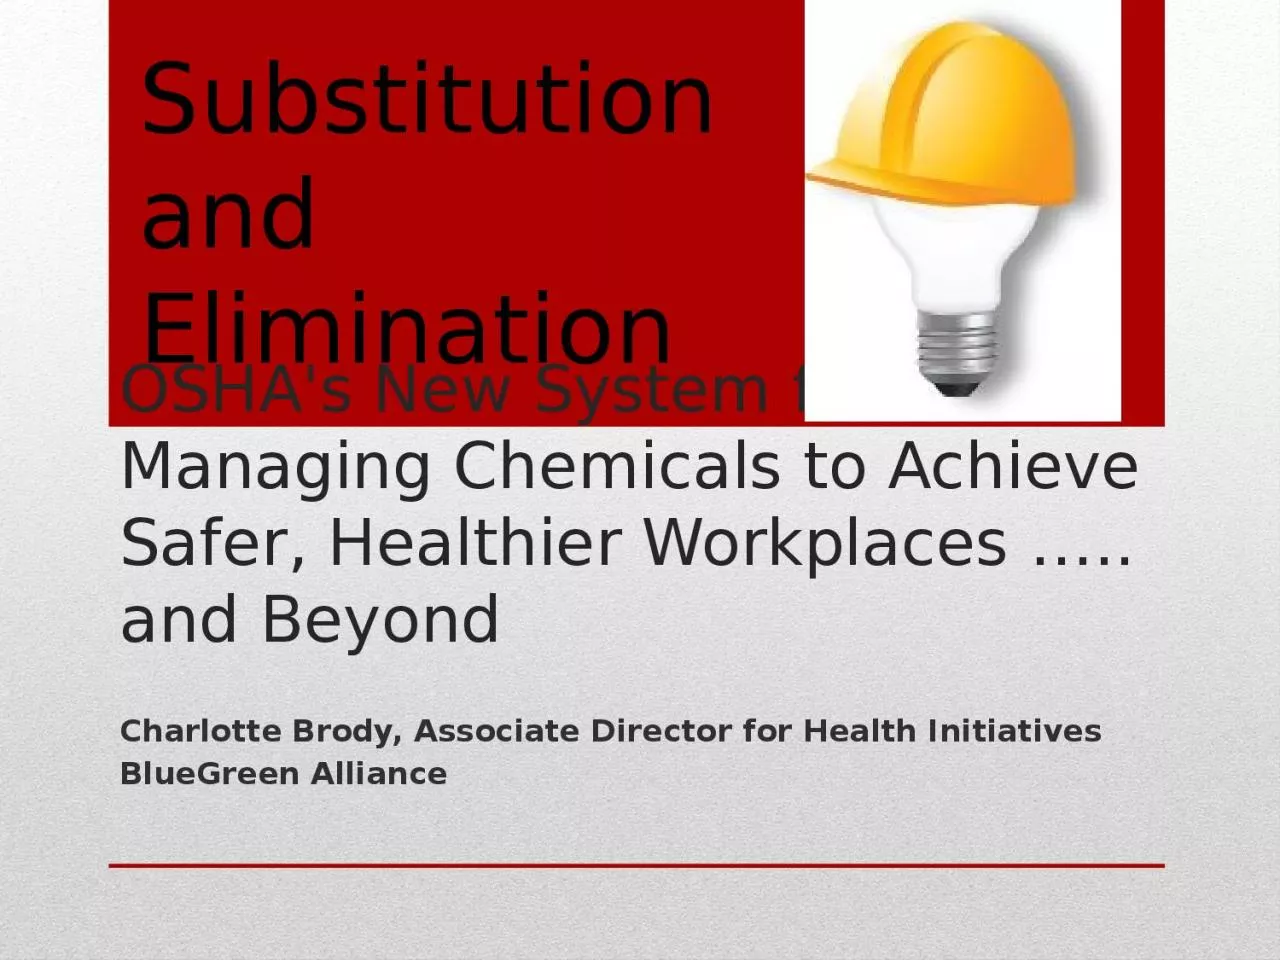 OSHA's  New System for Managing Chemicals to Achieve Safer, Healthier